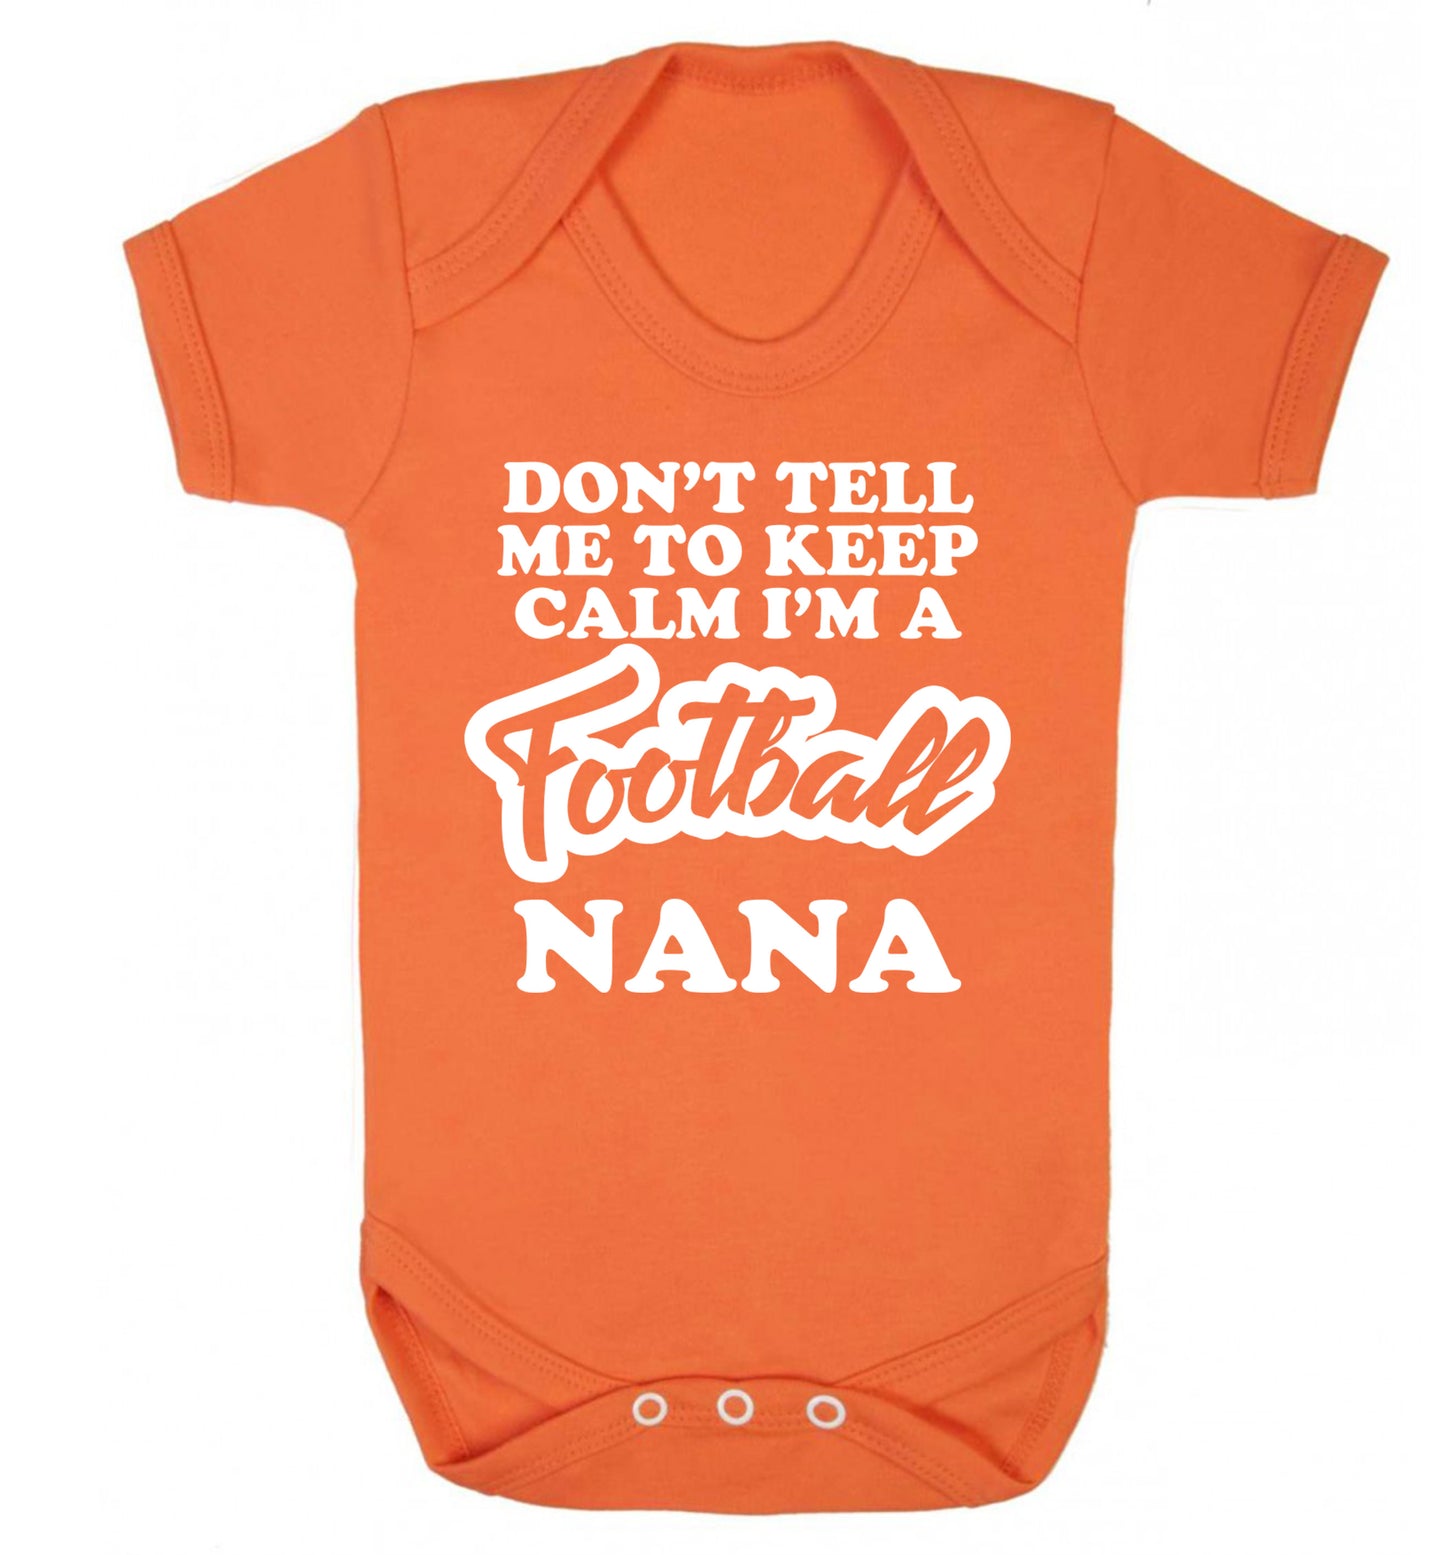 Don't tell me to keep calm I'm a football nana Baby Vest orange 18-24 months